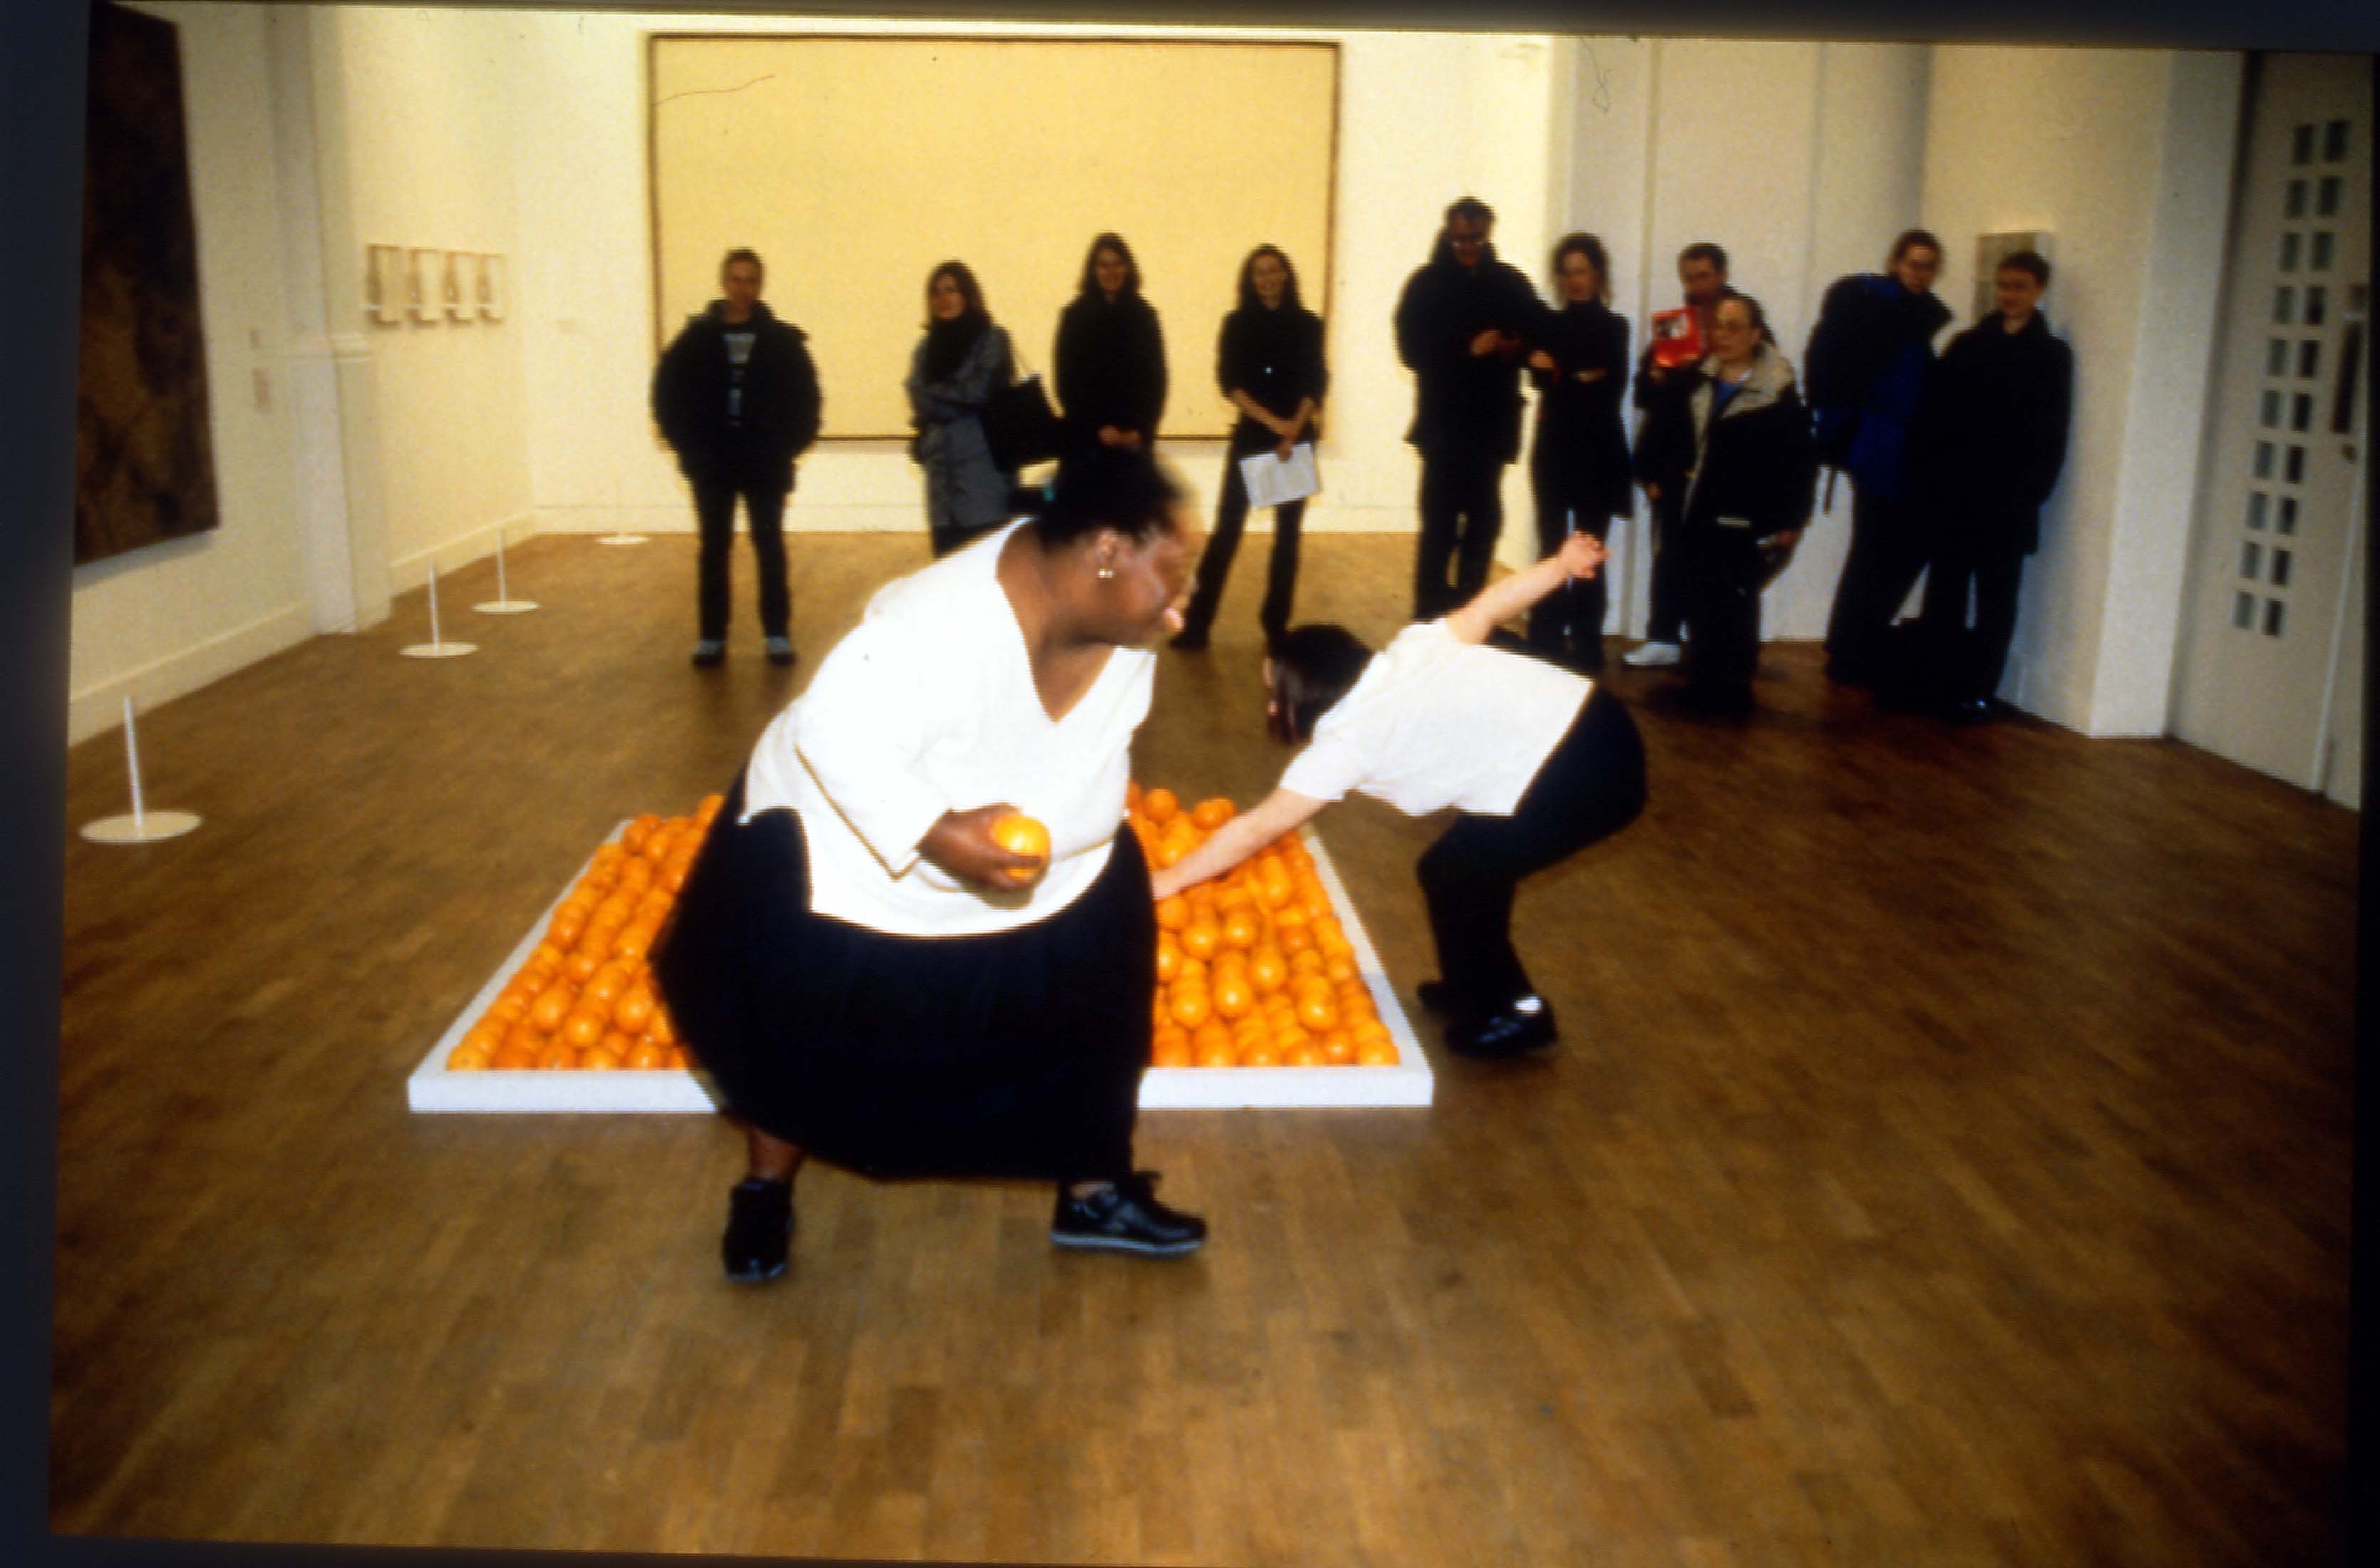 Photo of Natalie dancing with an orange at Whitechapel Art Gallery